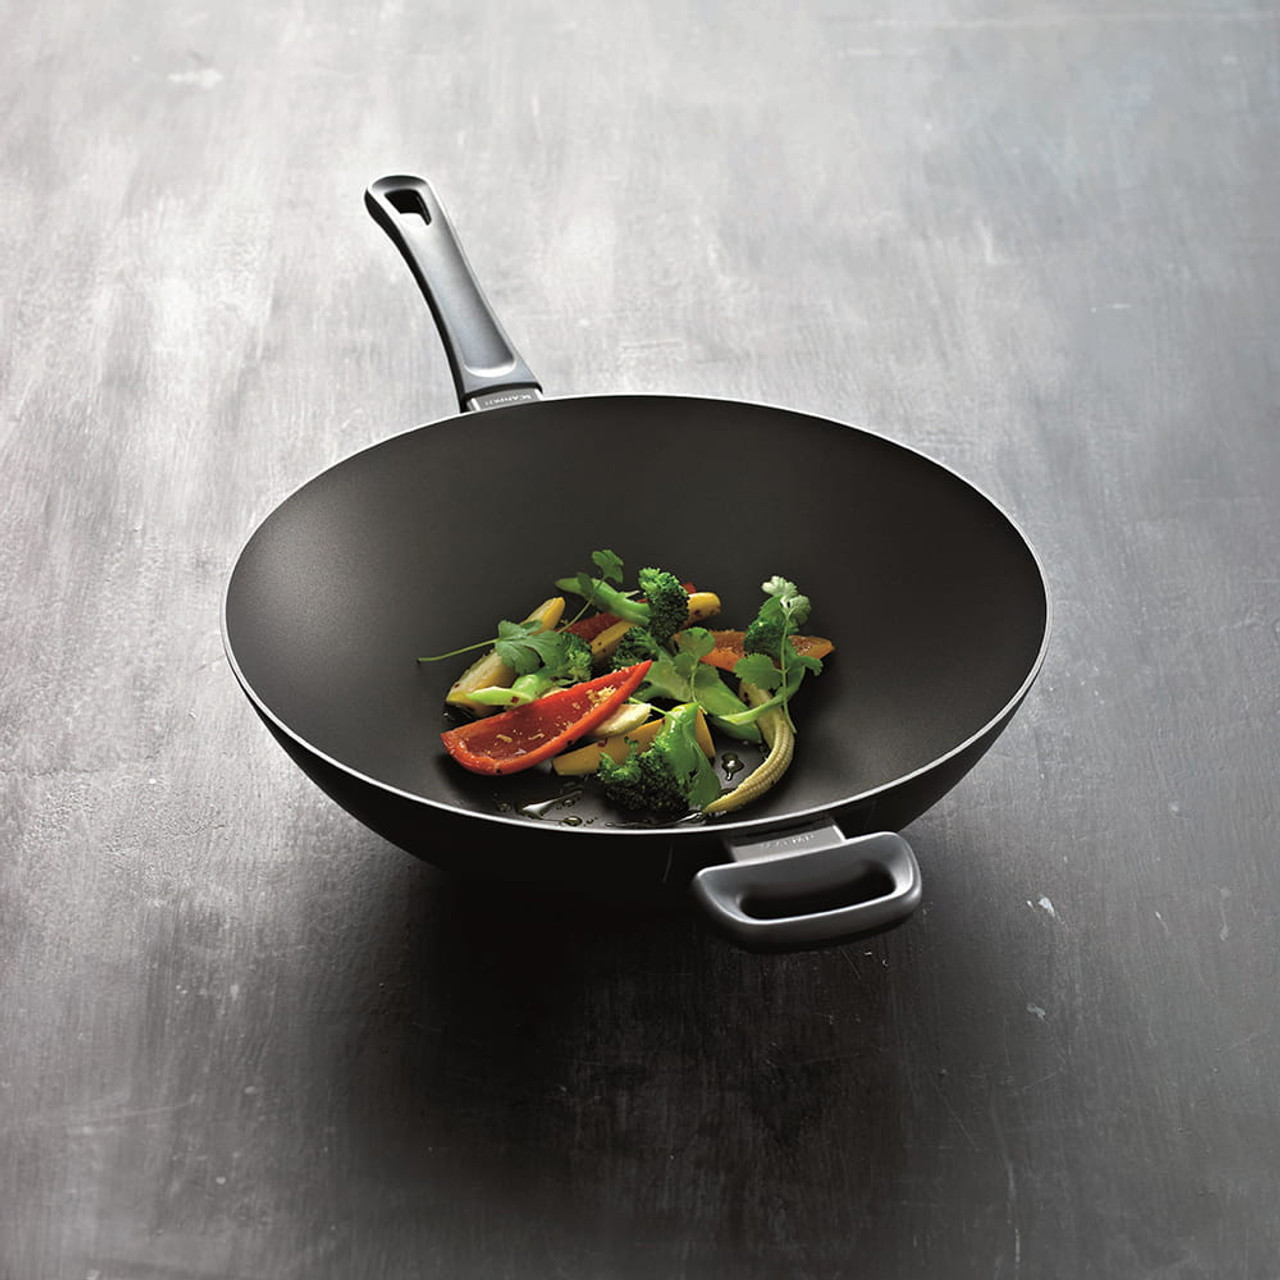 https://cdn11.bigcommerce.com/s-hccytny0od/images/stencil/1280x1280/products/3124/11069/scanpan-classic-induction-wok-2__32208.1578041404.jpg?c=2?imbypass=on